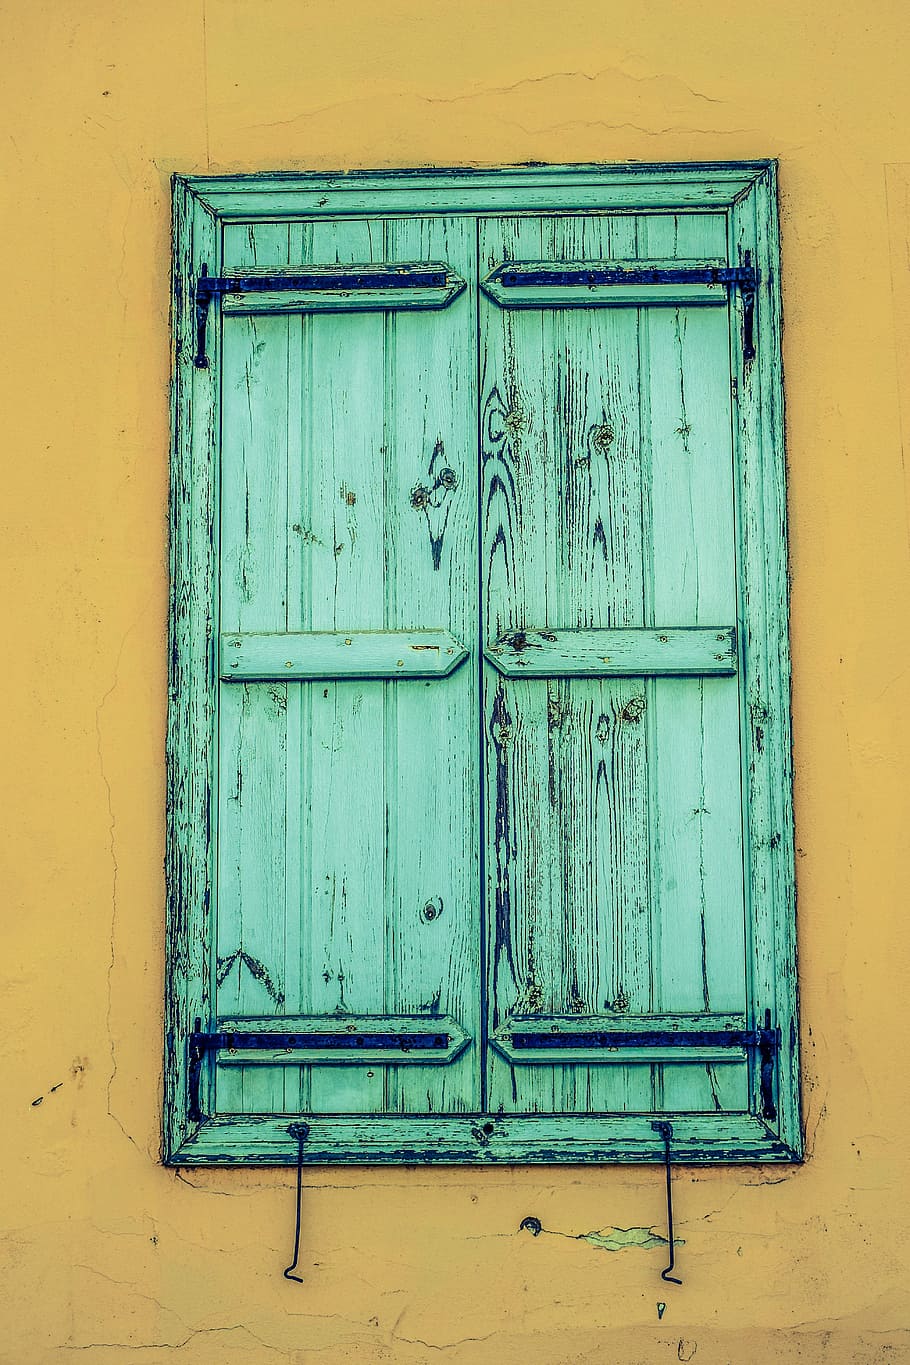 Wall, Window, Wooden, Old, Aged, weathered, rusty, blue, village, HD wallpaper